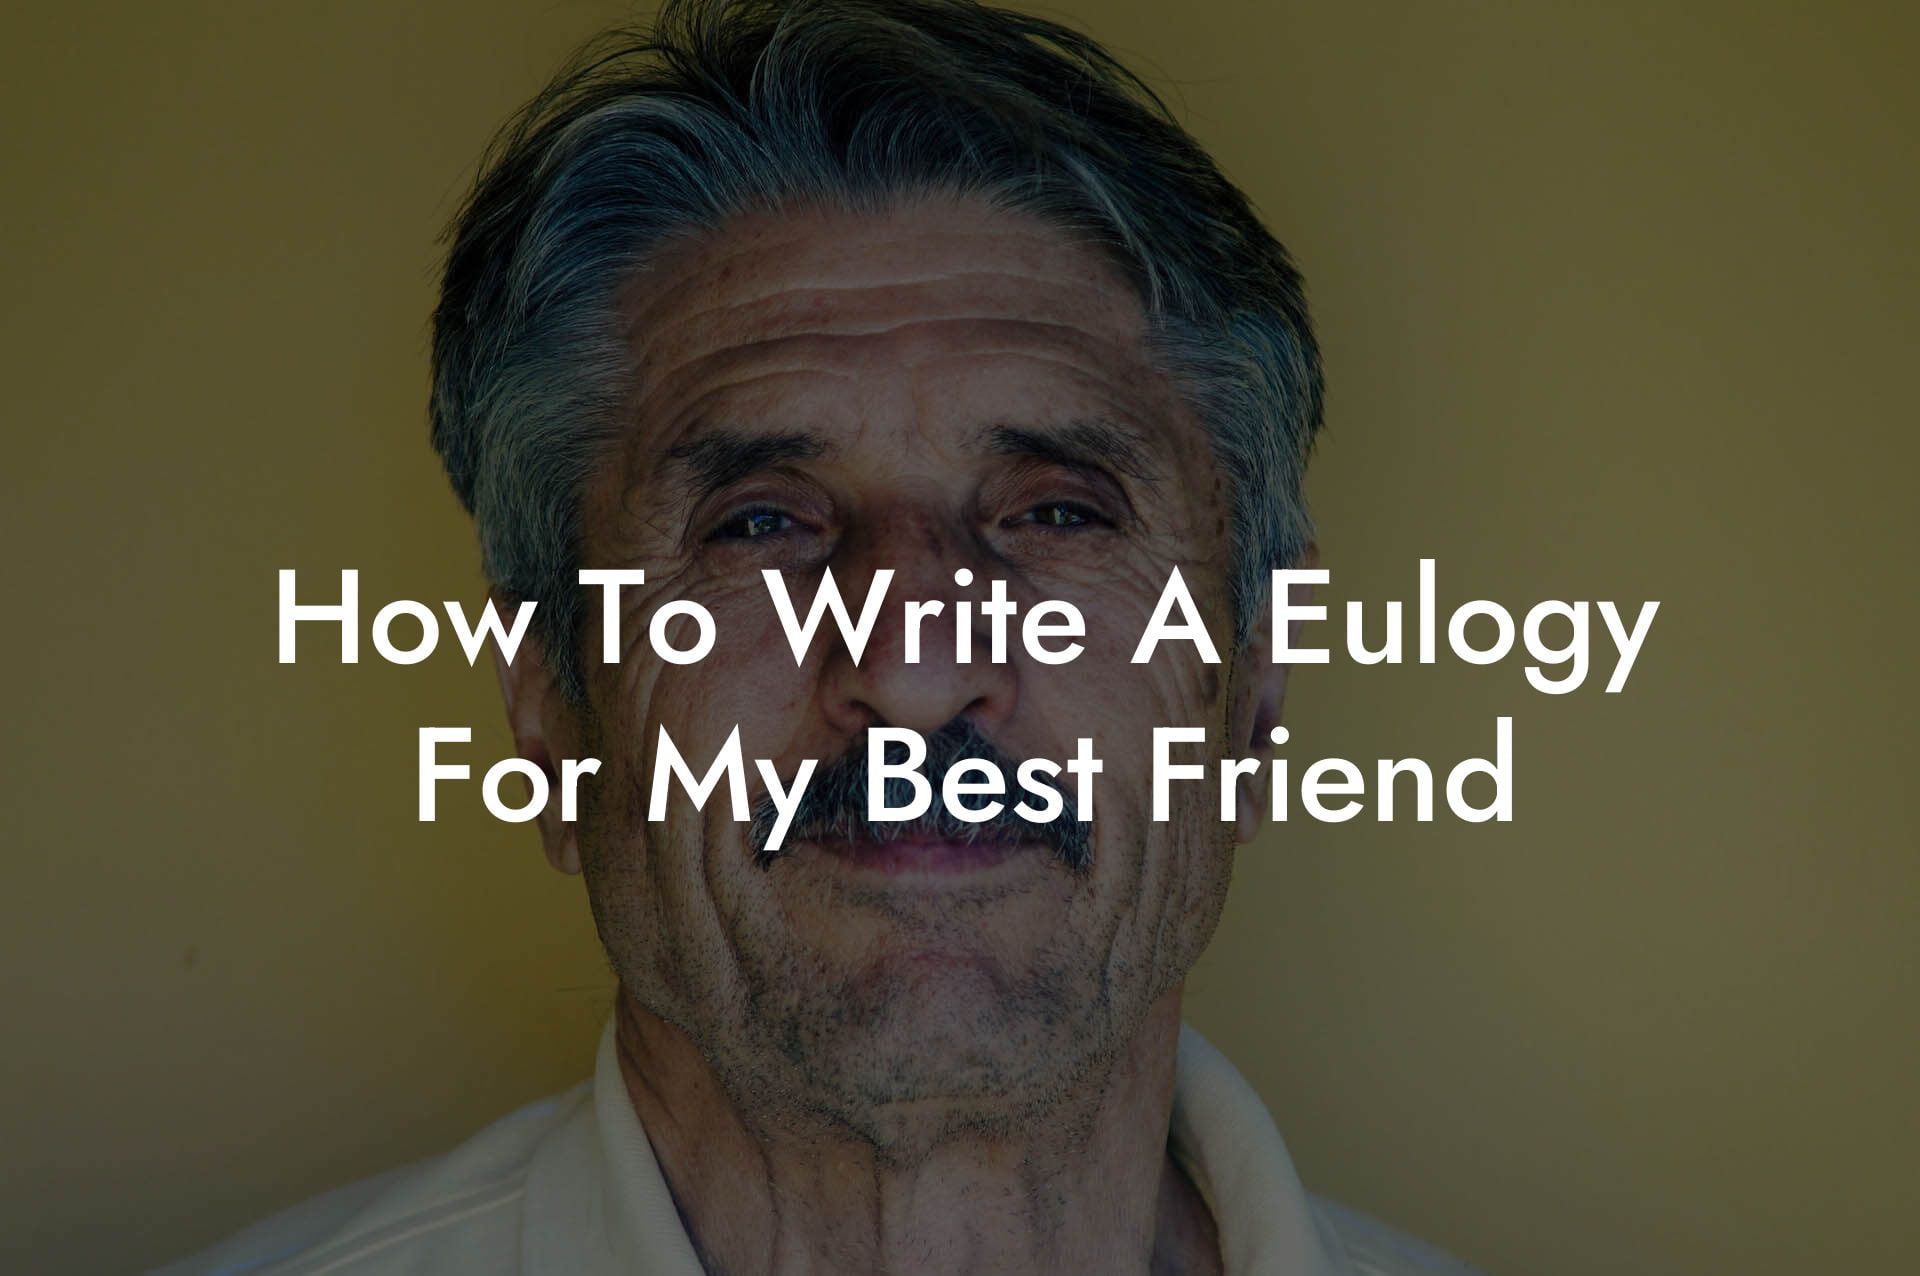 How To Write A Eulogy For My Best Friend